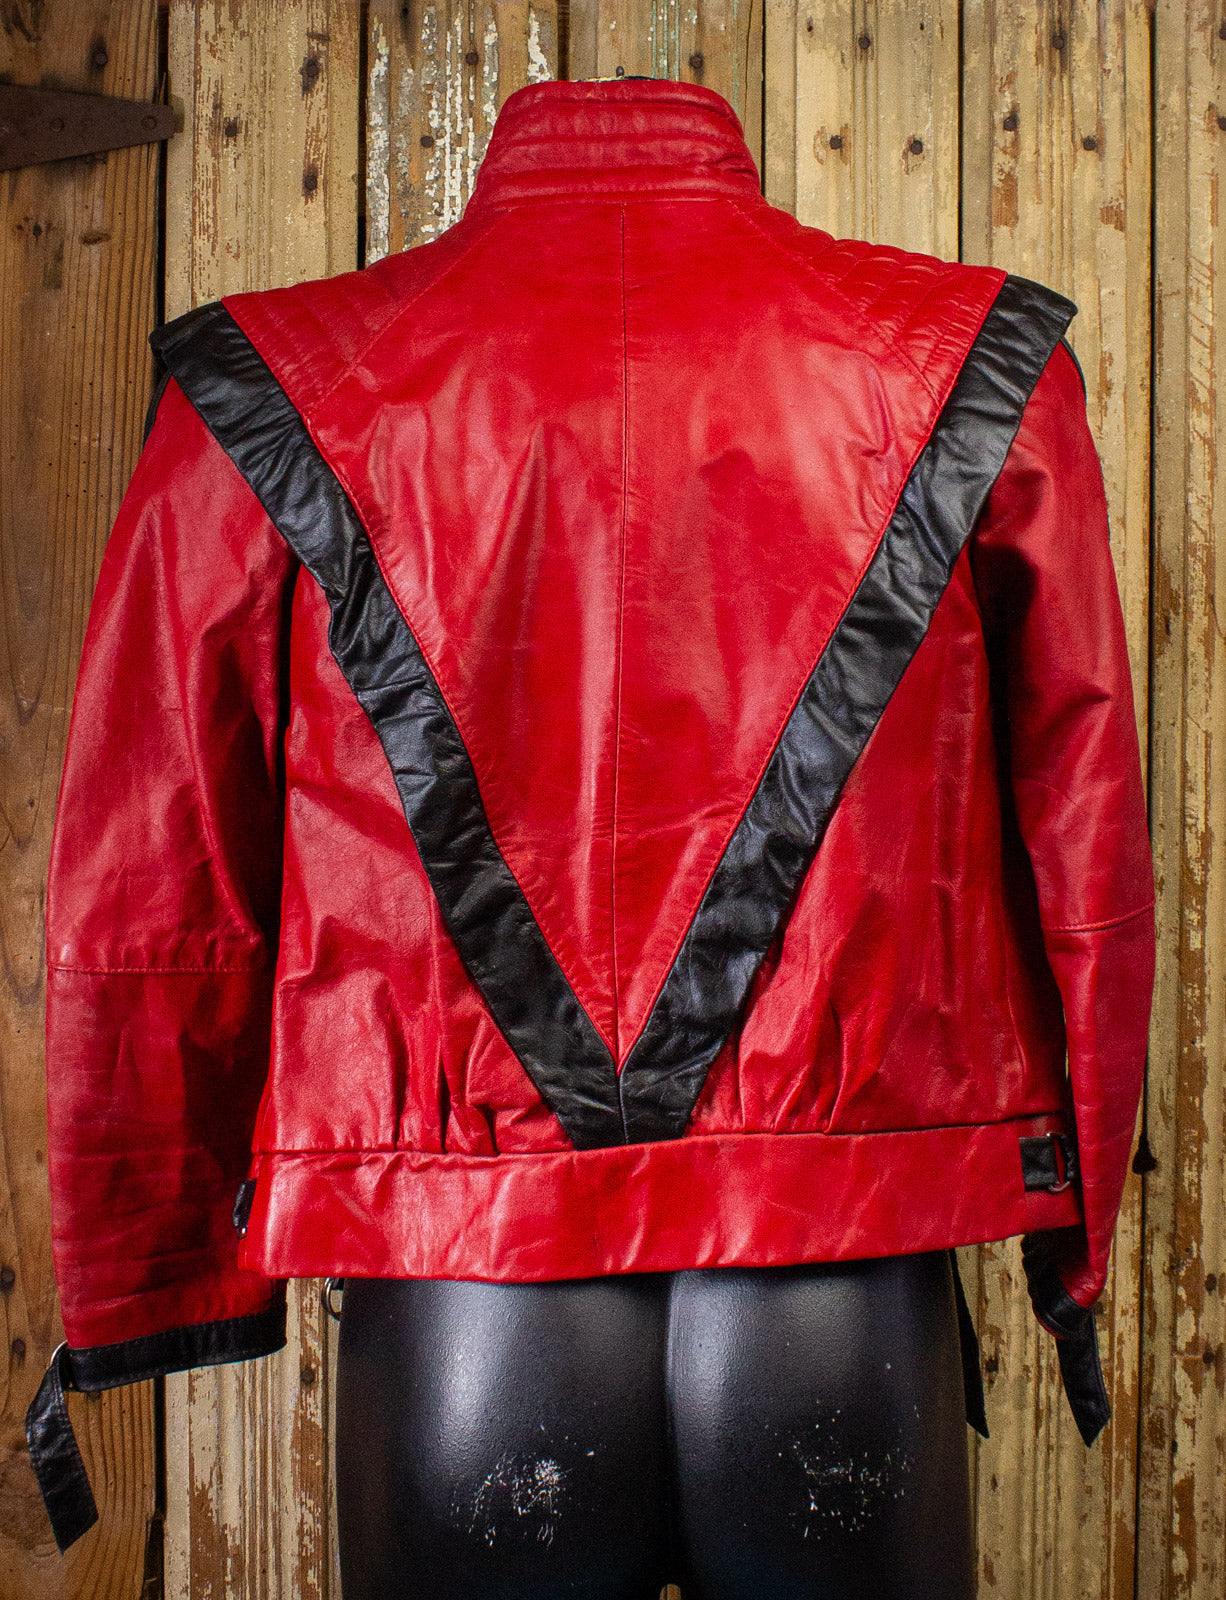 Vintage J. Palo Red Leather Jacket Cropped 80s Small/Medium